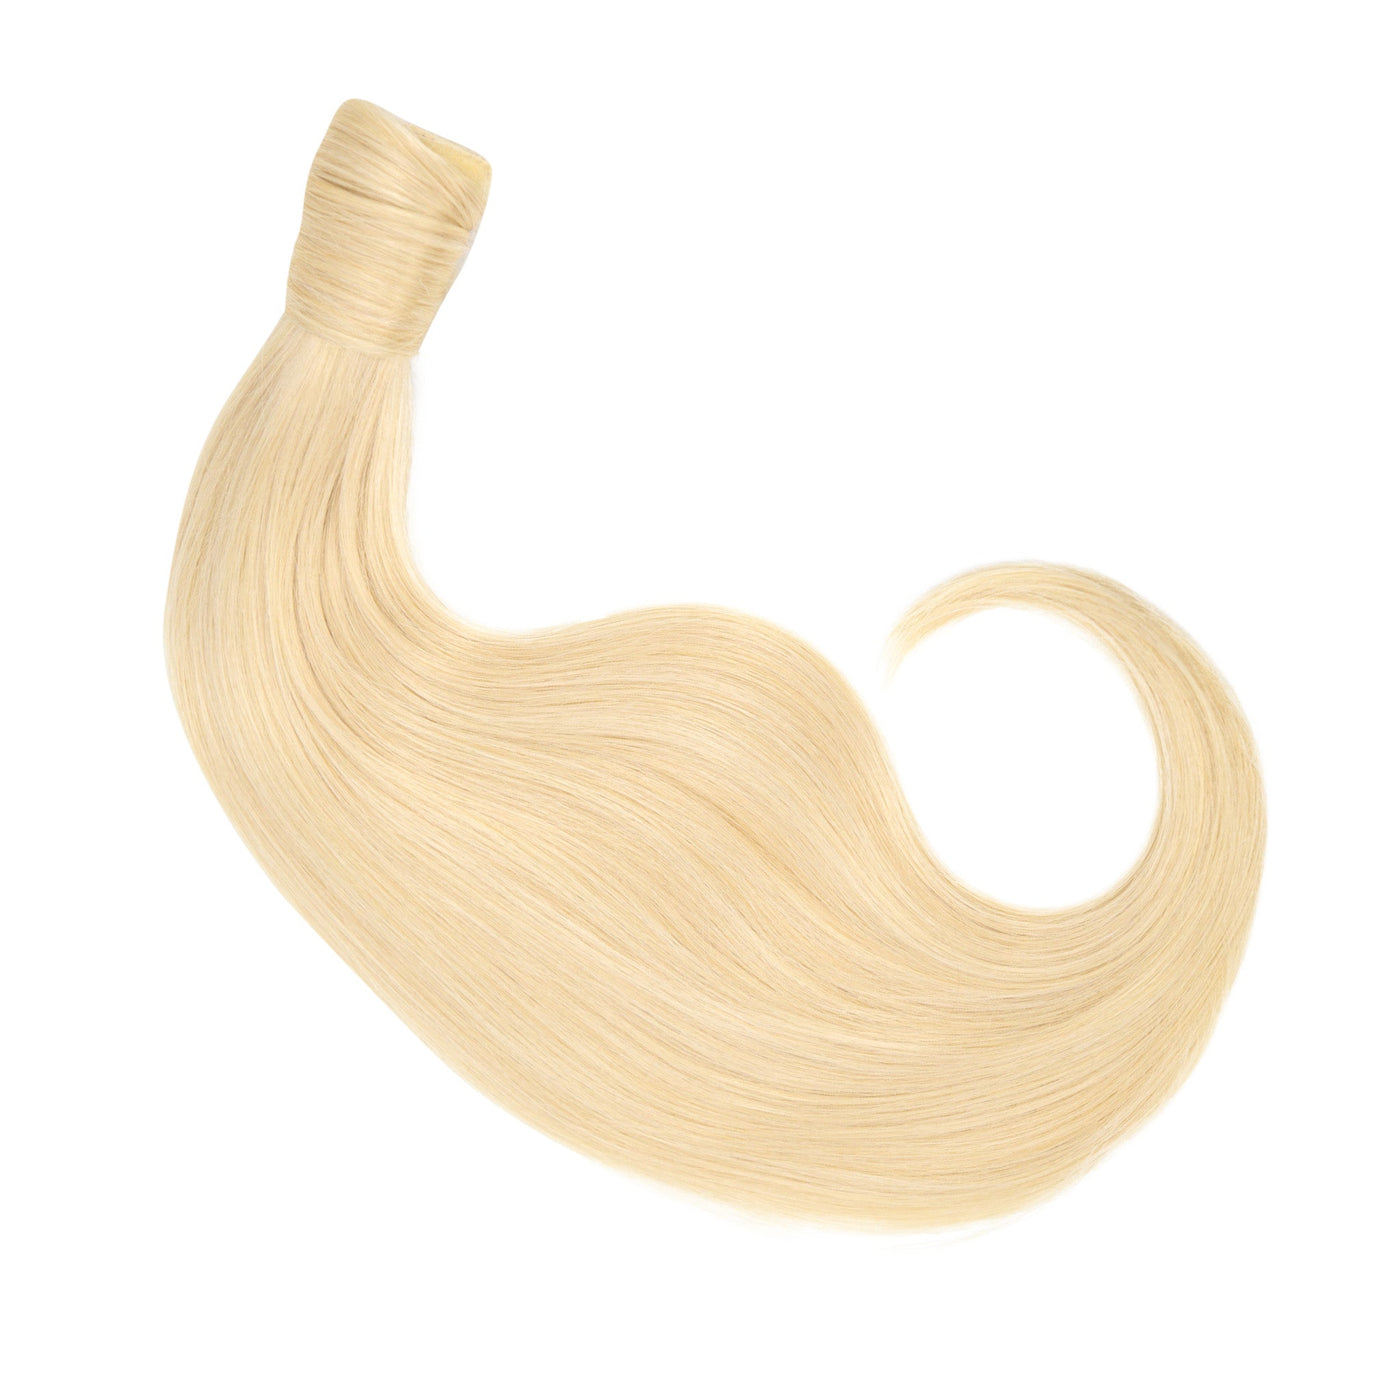 #24 AquaLyna Ponytail Hair Extension